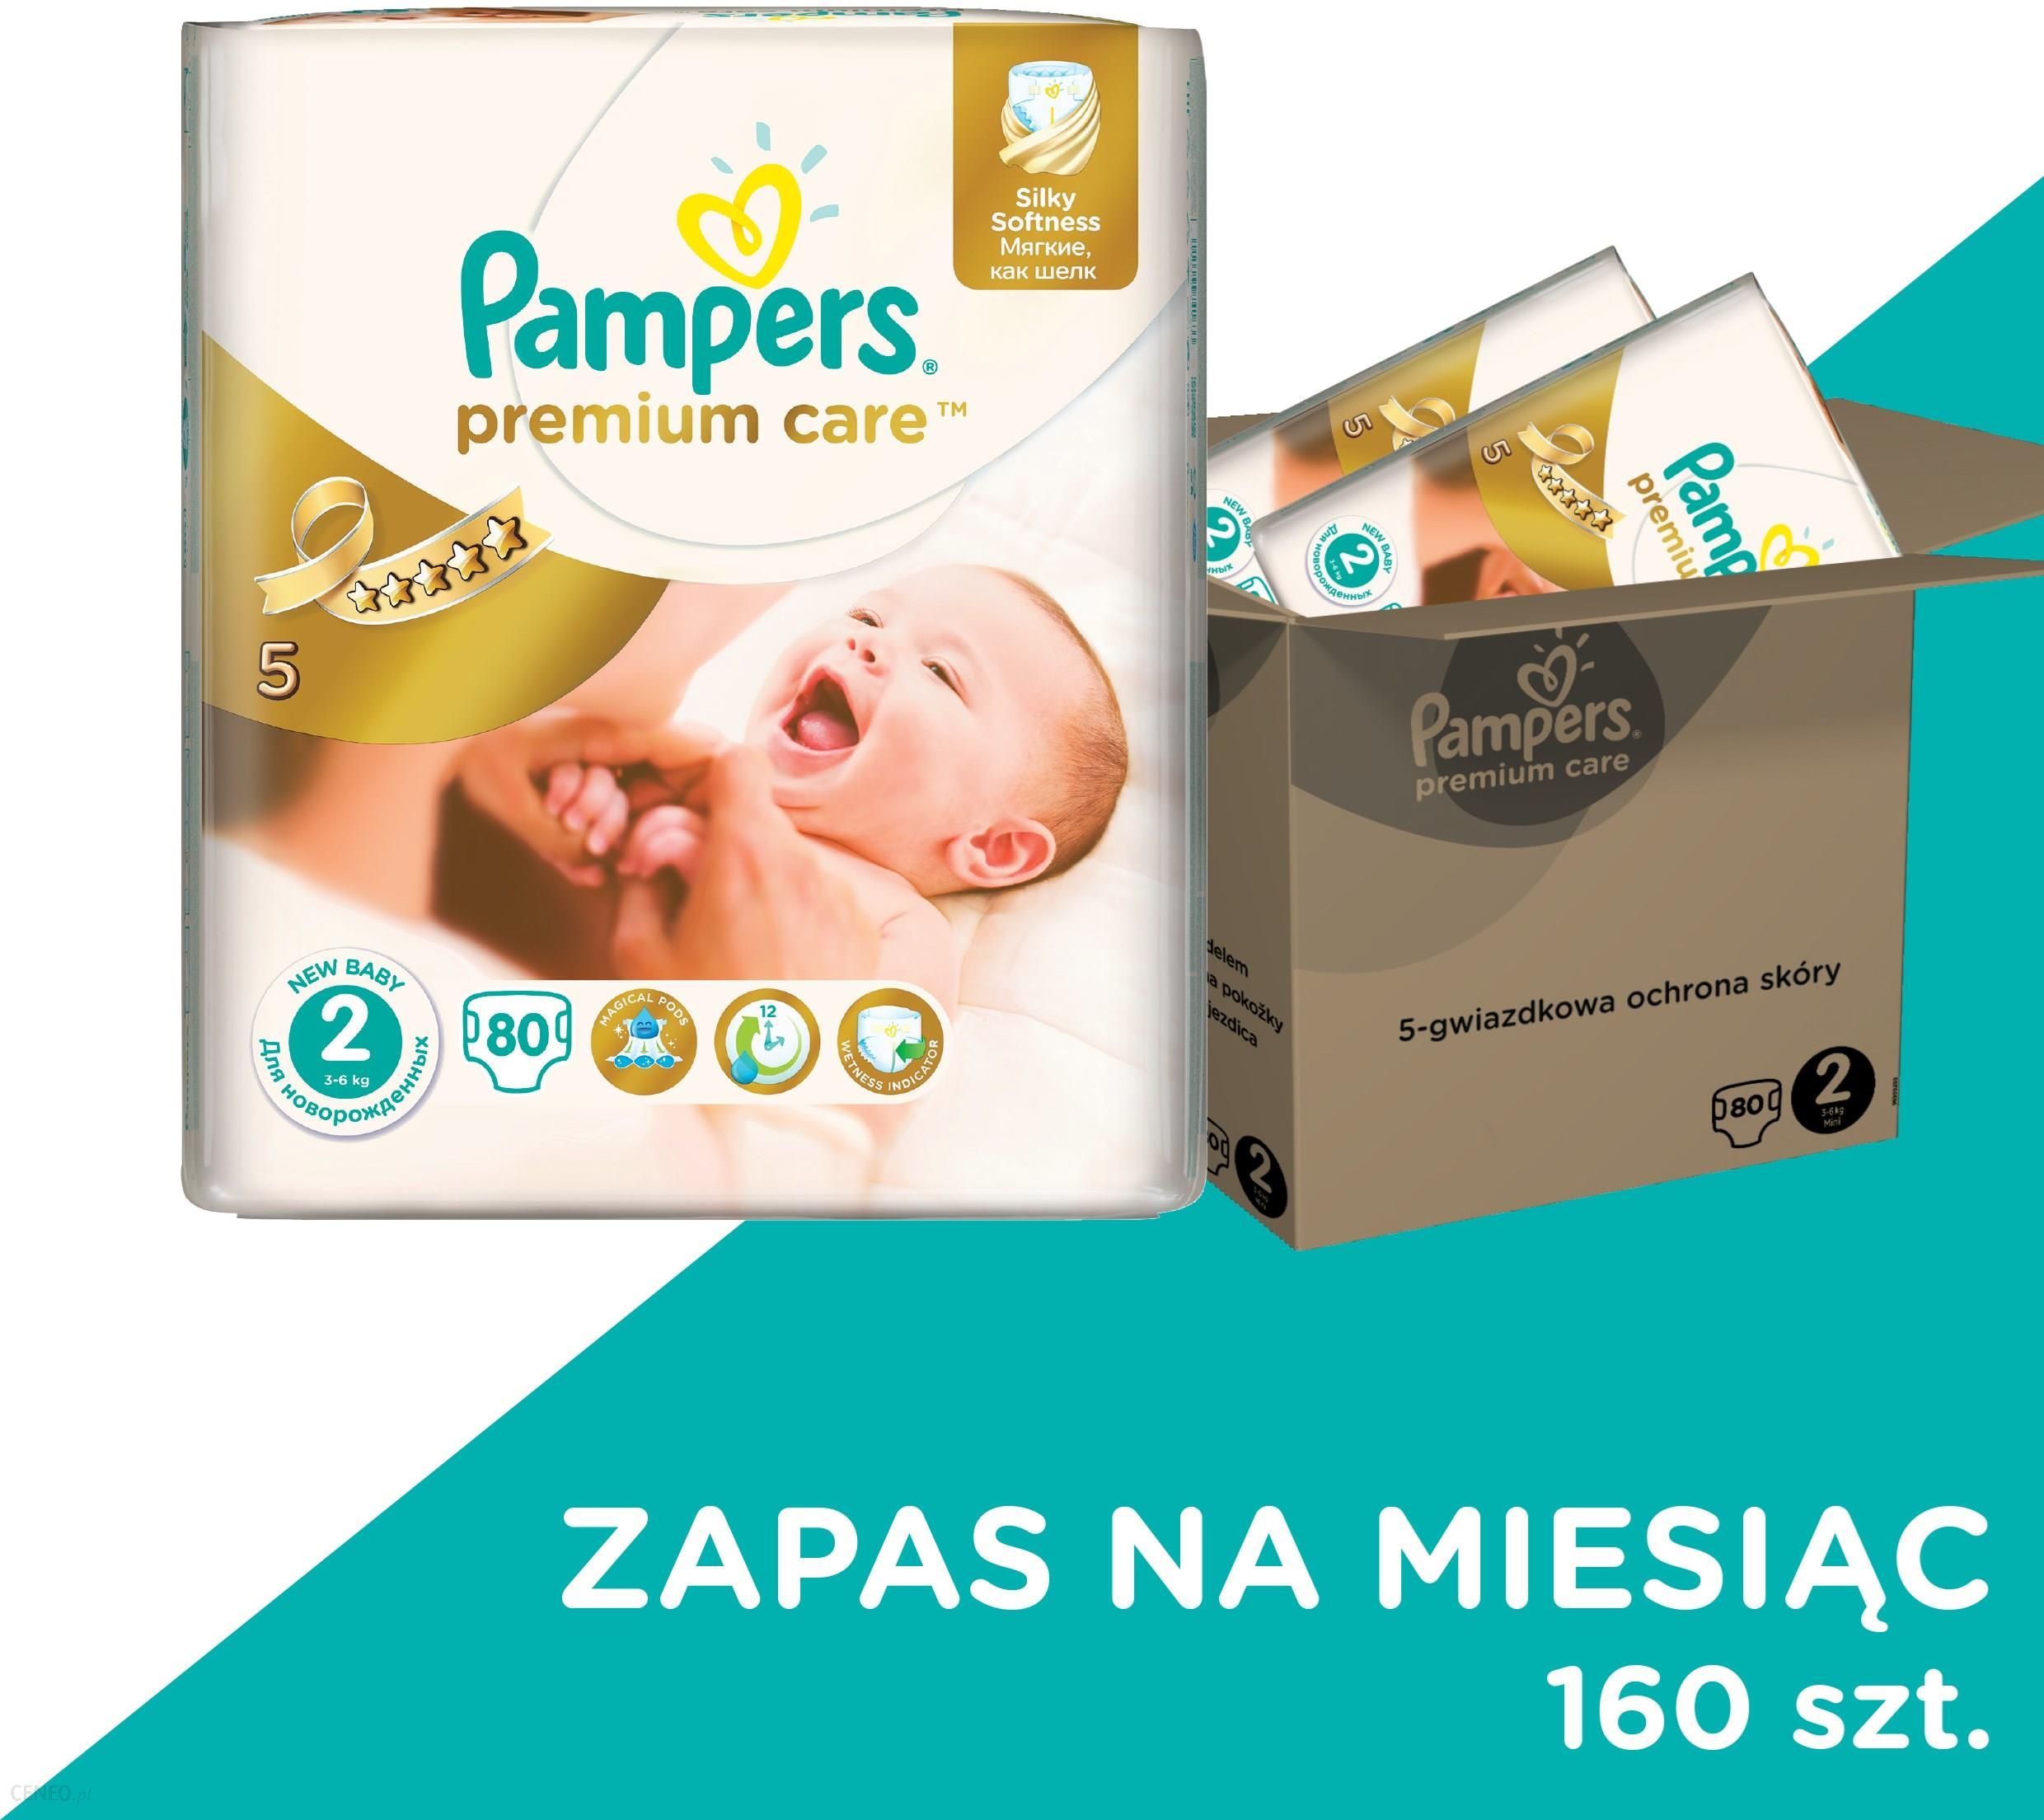 pampers premium protection 2